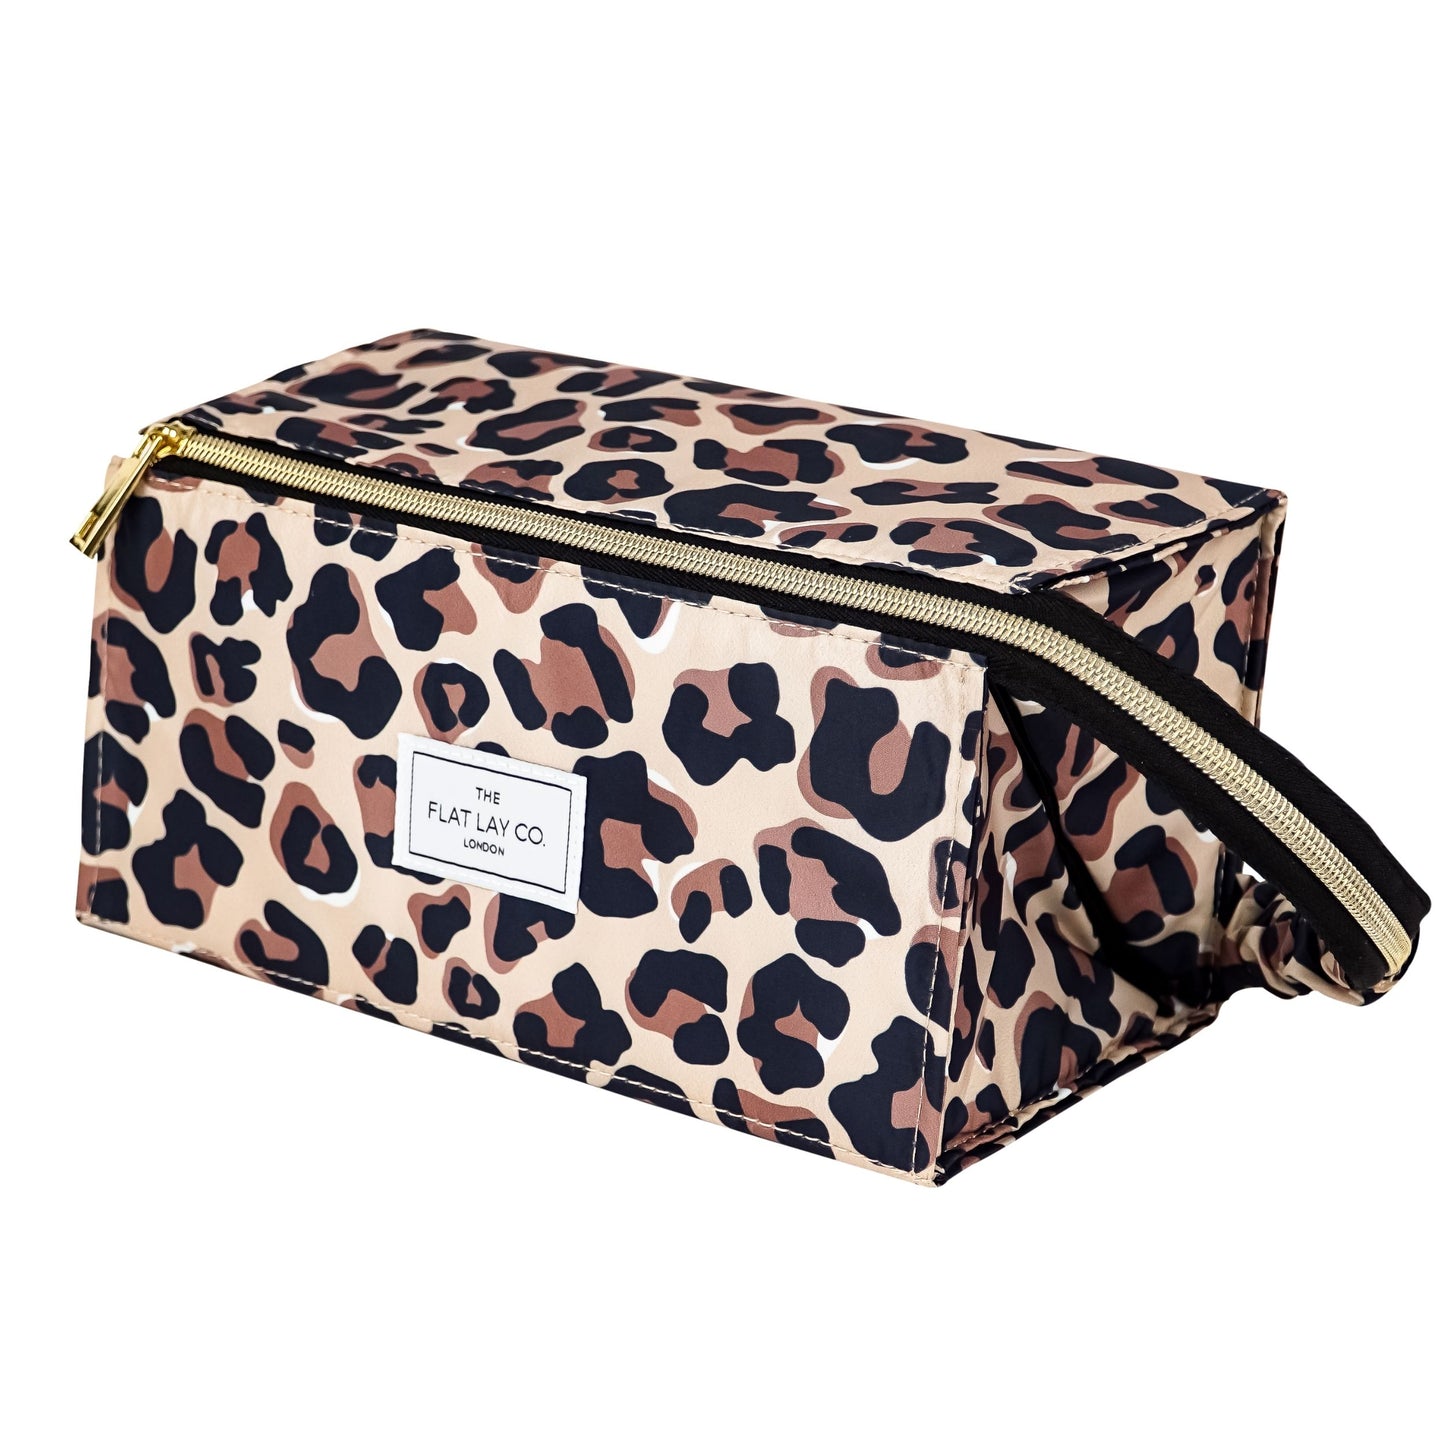 XXL Makeup Box Bag and Tray in Leopard Print